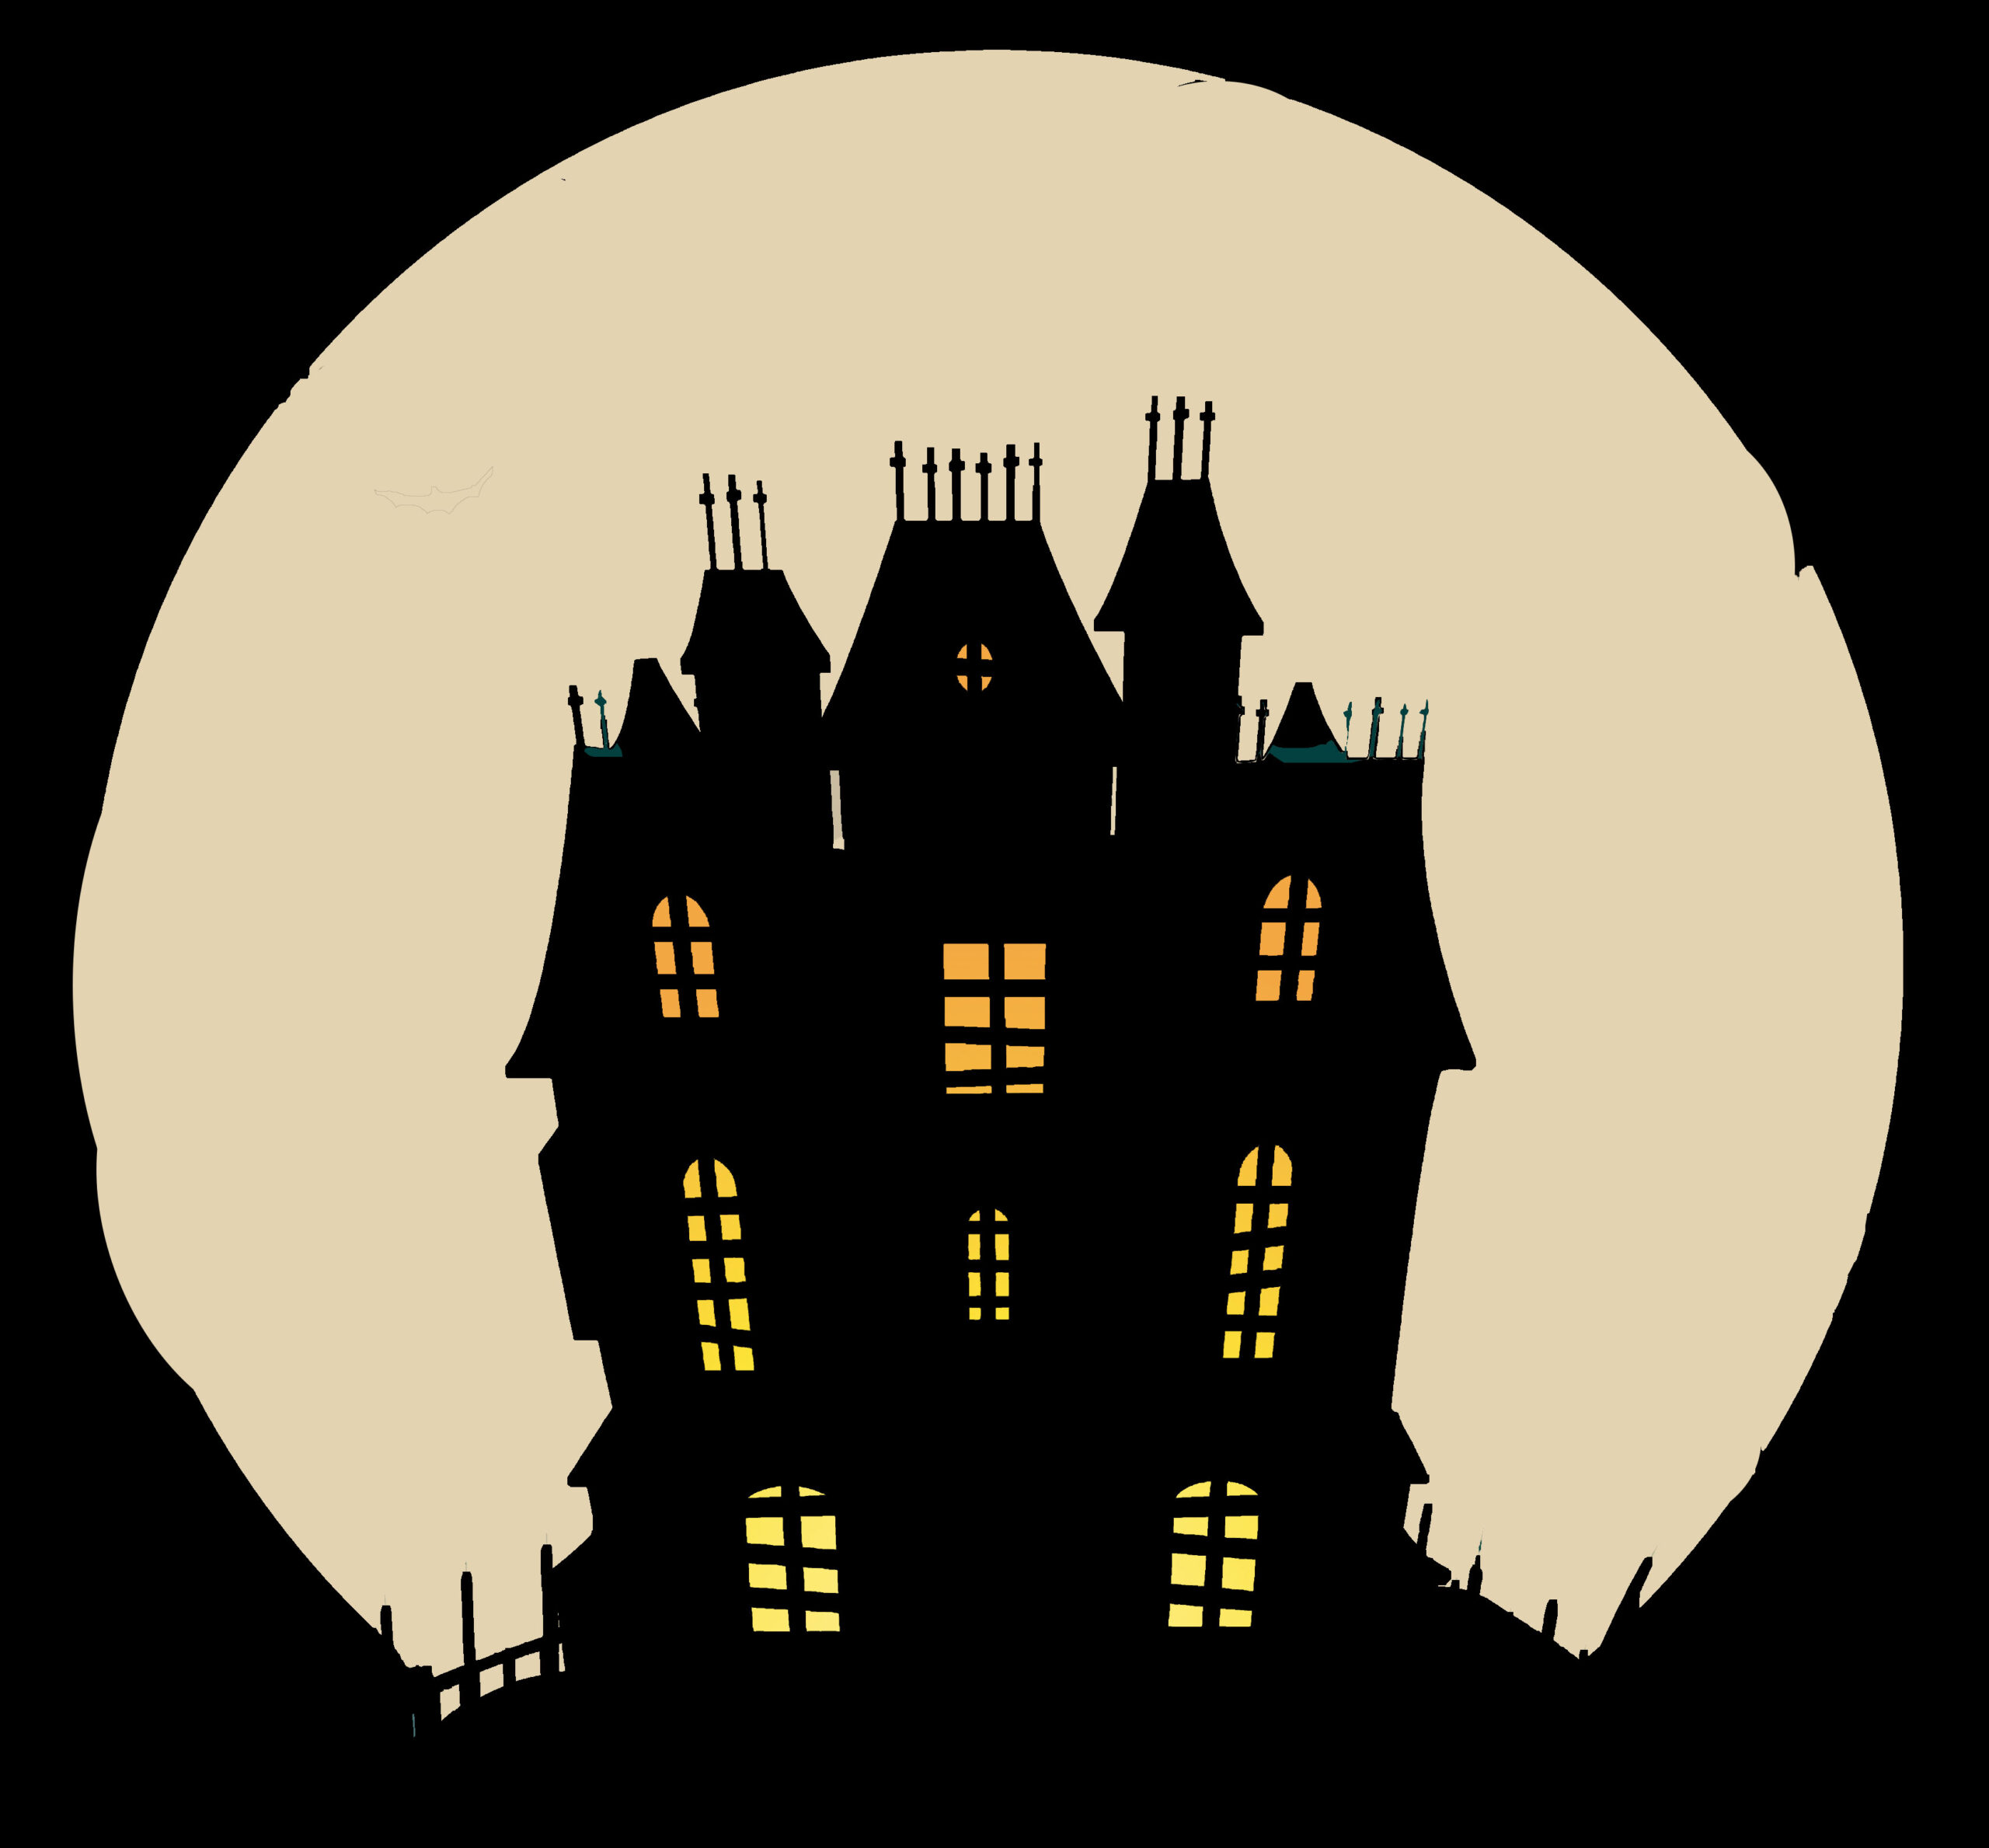 mansion clipart free